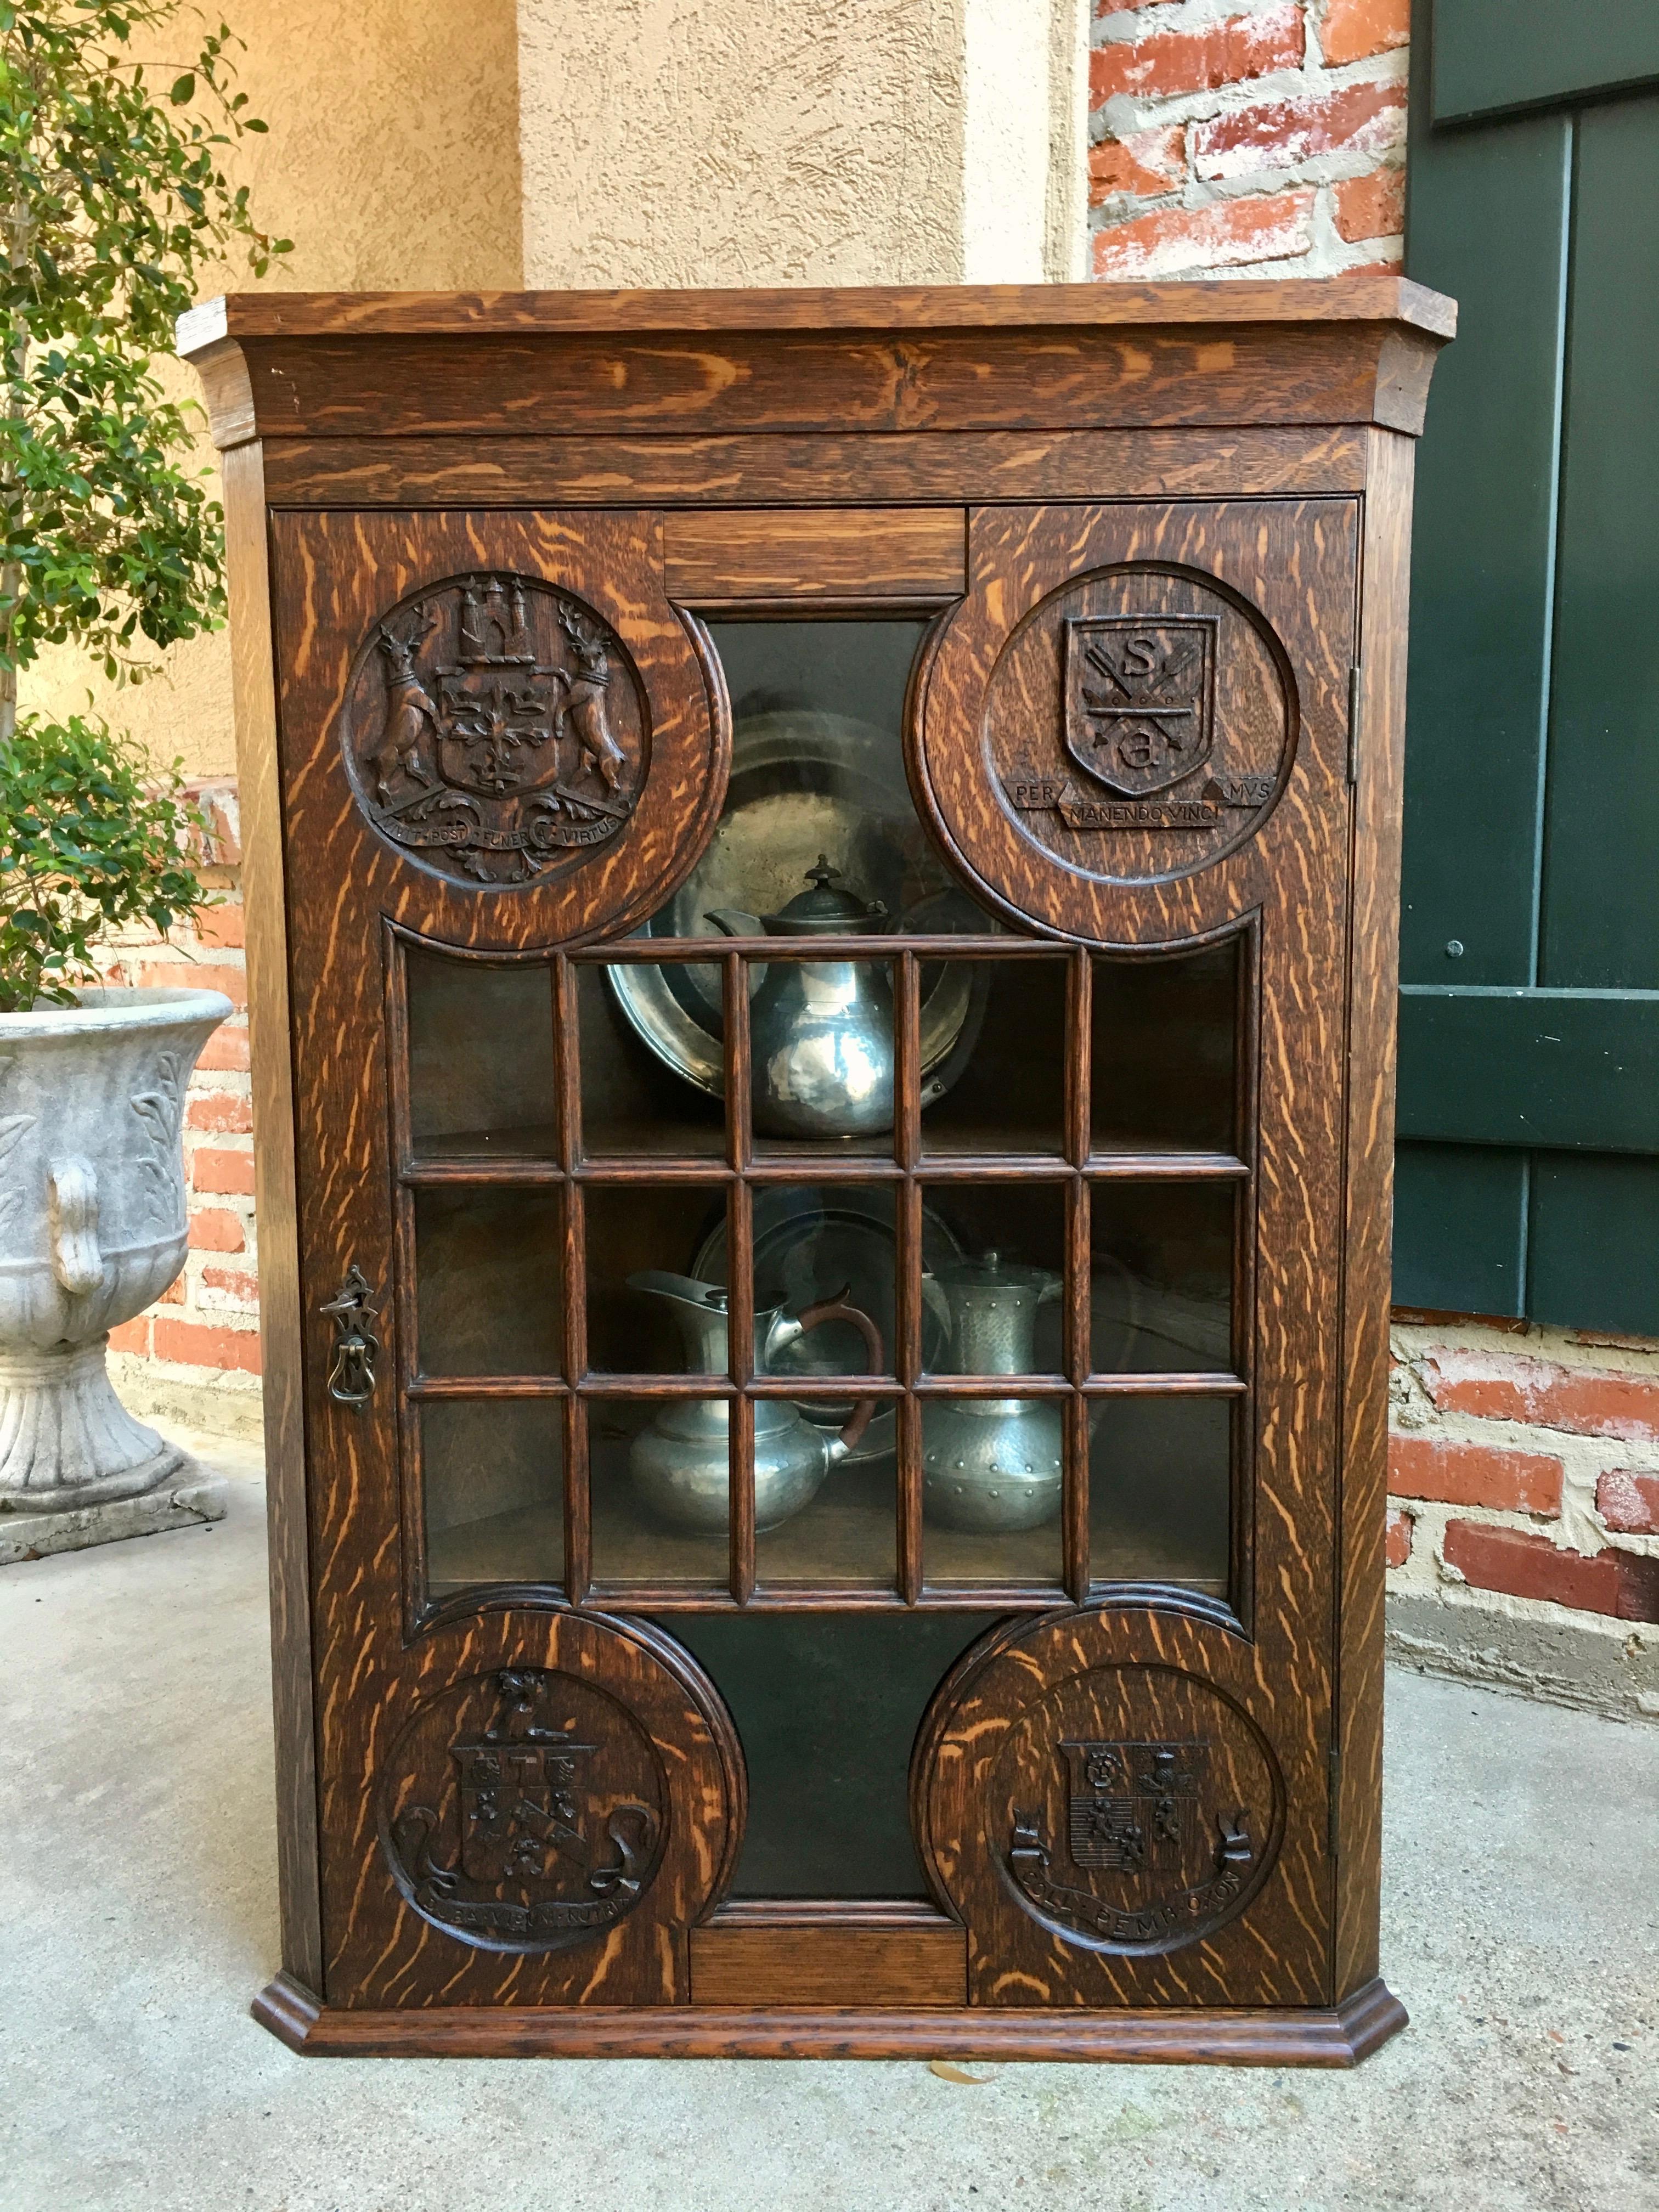 Direct from England, a very unique antique English carved tiger oak corner wall cabinet ~
~Some of the most unique and amazing carvings. Each of the four is a different coat of arms, complete with their unique Latin motto~
Sedberg School in North